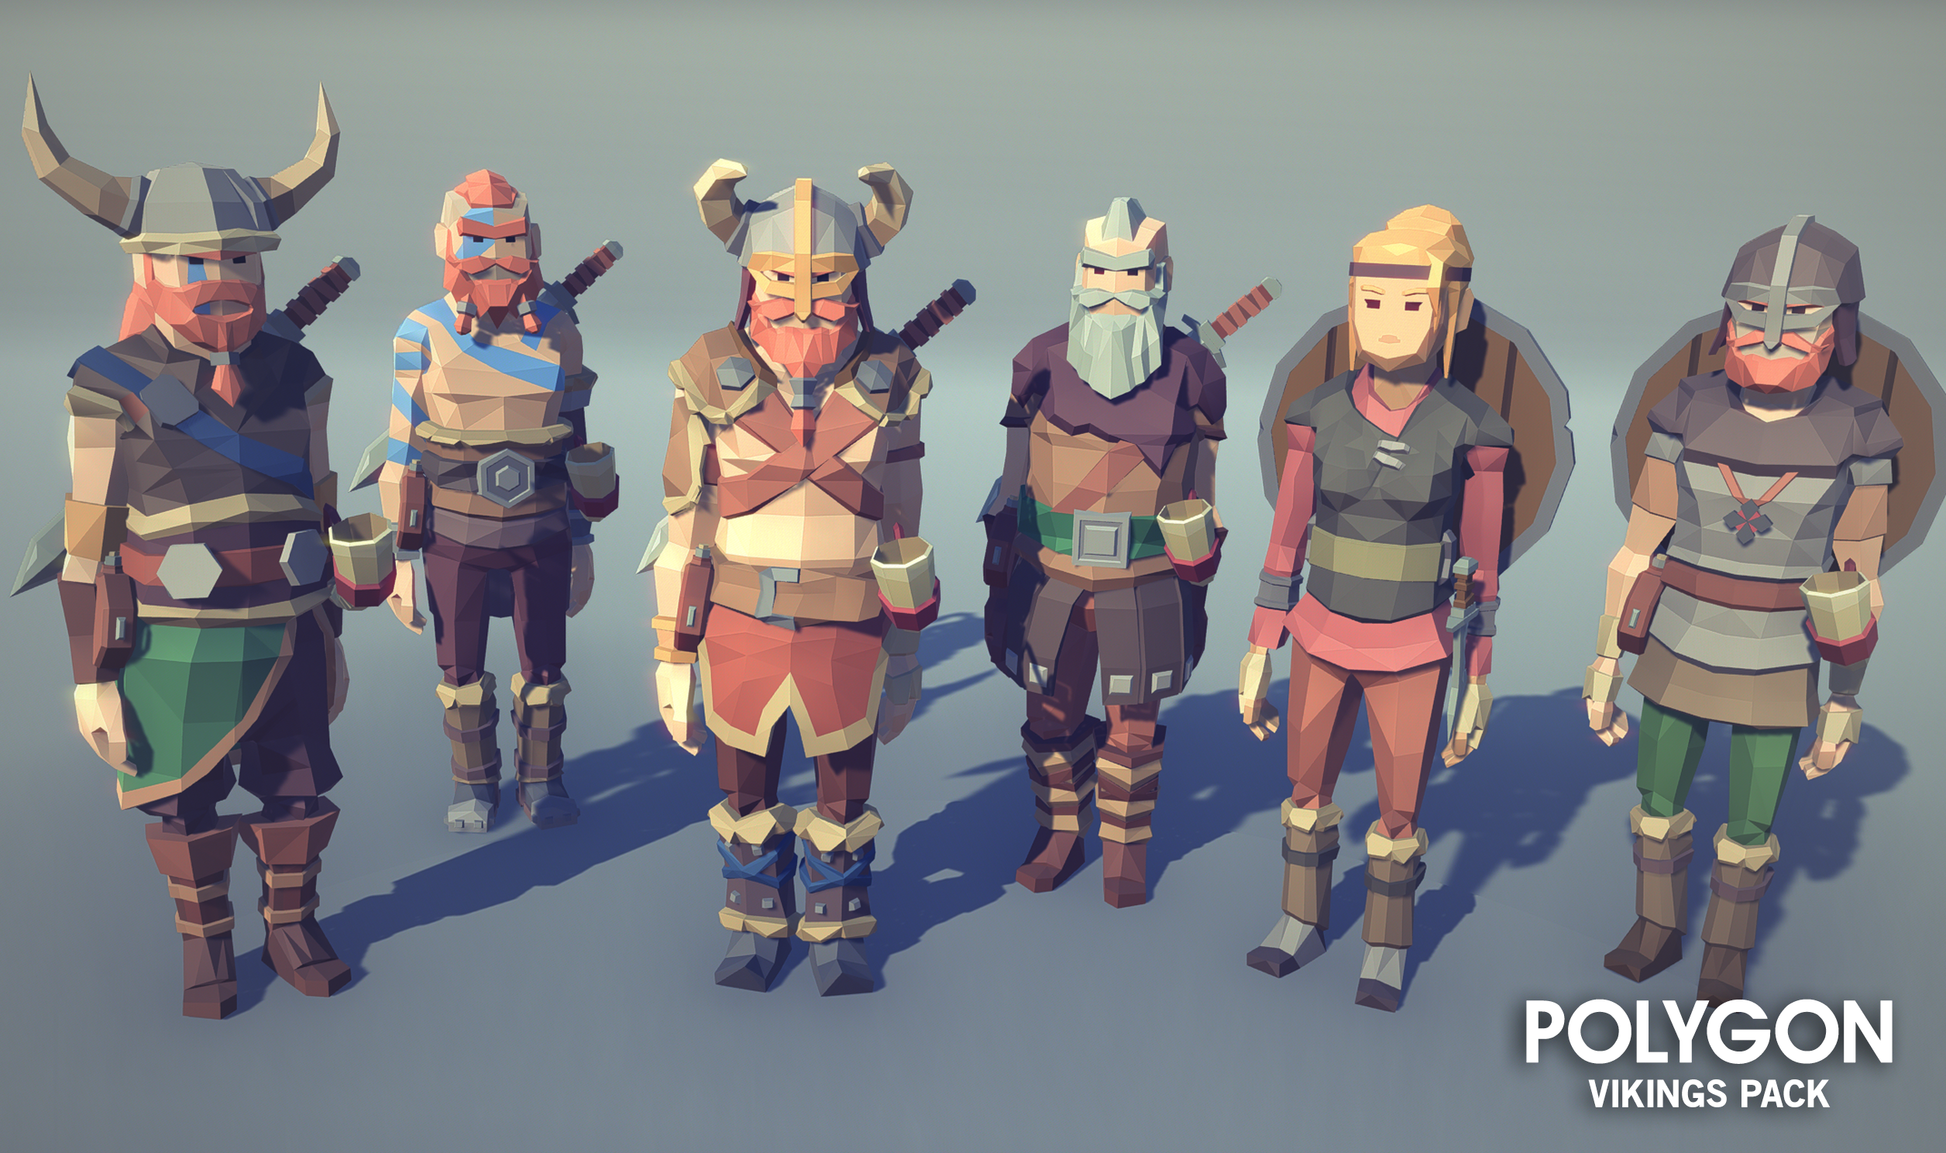 POLYGON - Vikings Pack - Synty Studios - Unity and Unreal 3D low poly assets for game development